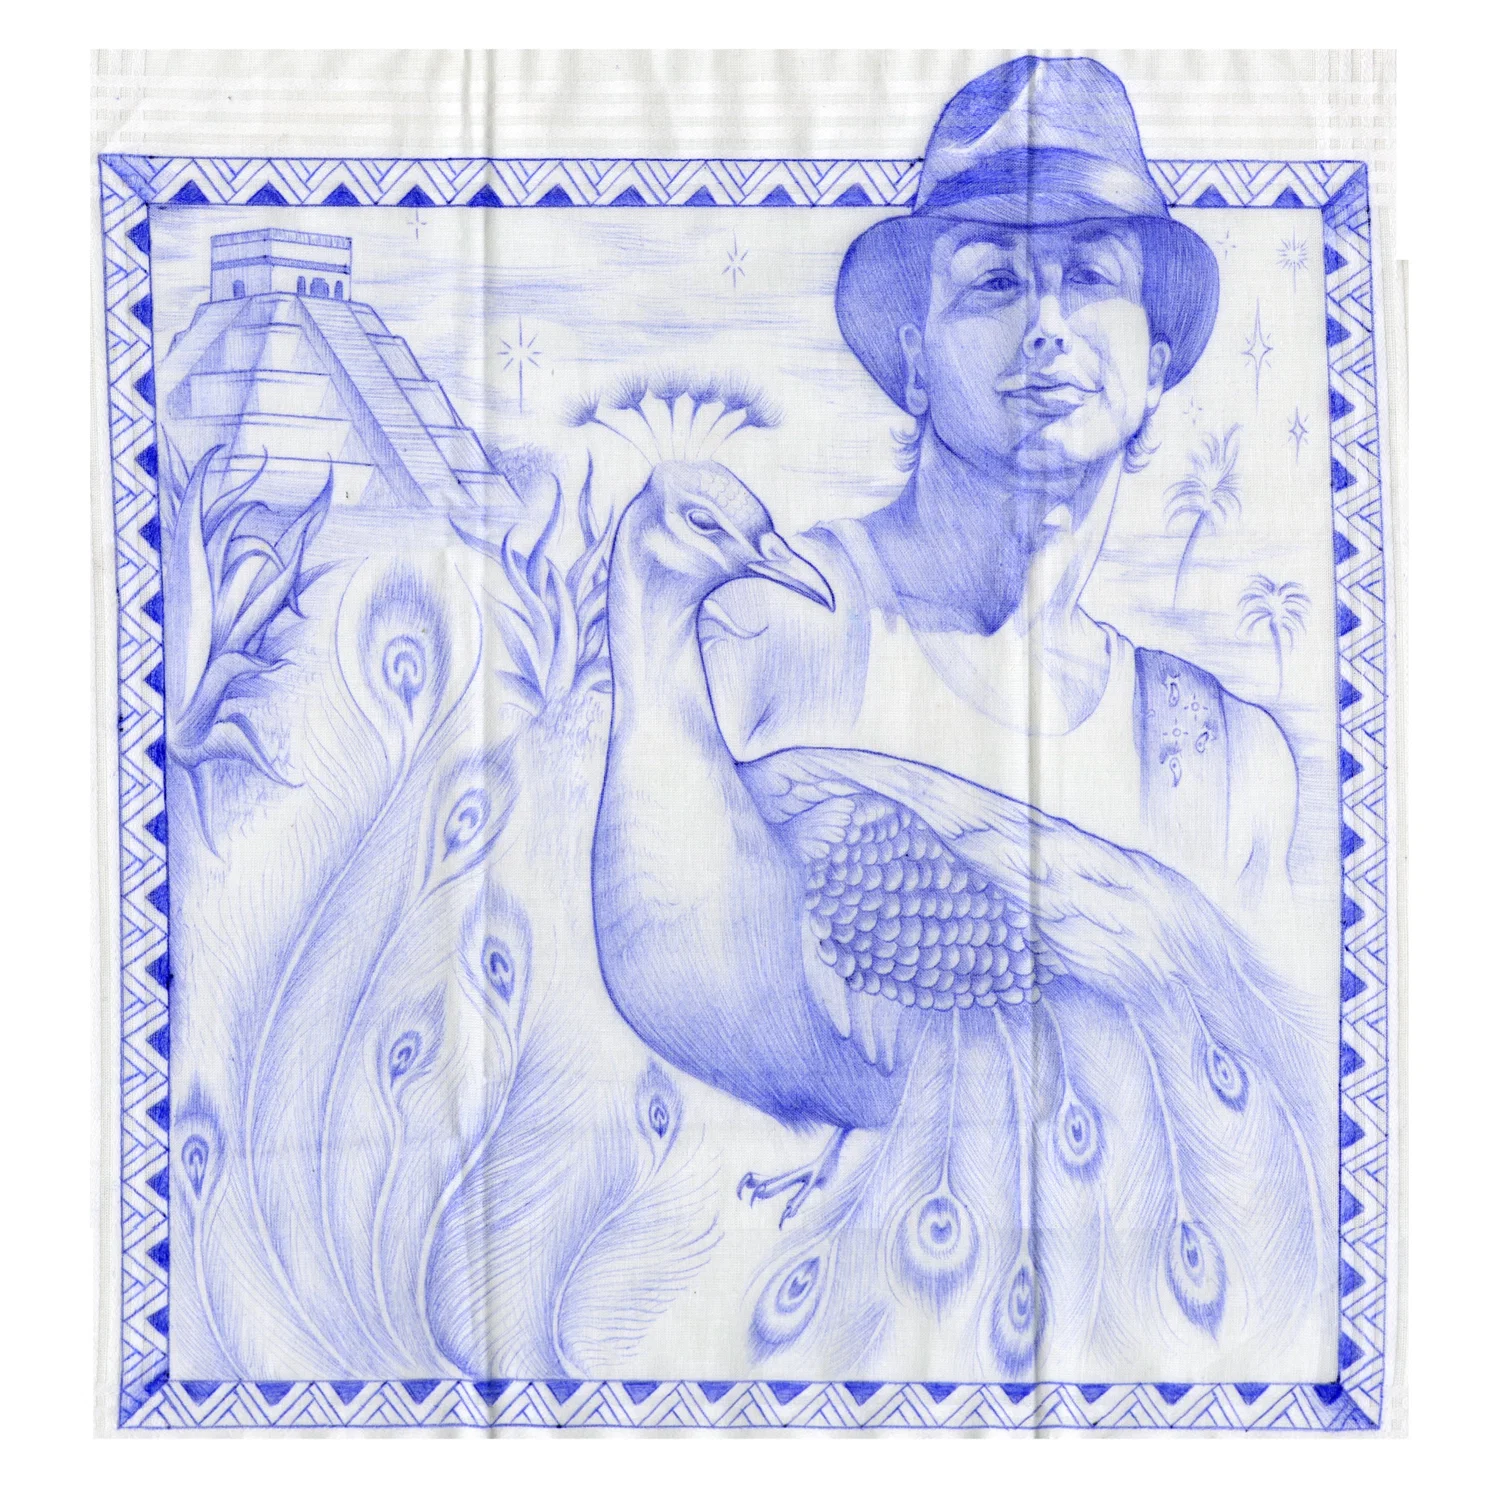 A depiction of chicanoism through the lens or pen on handkerchief 